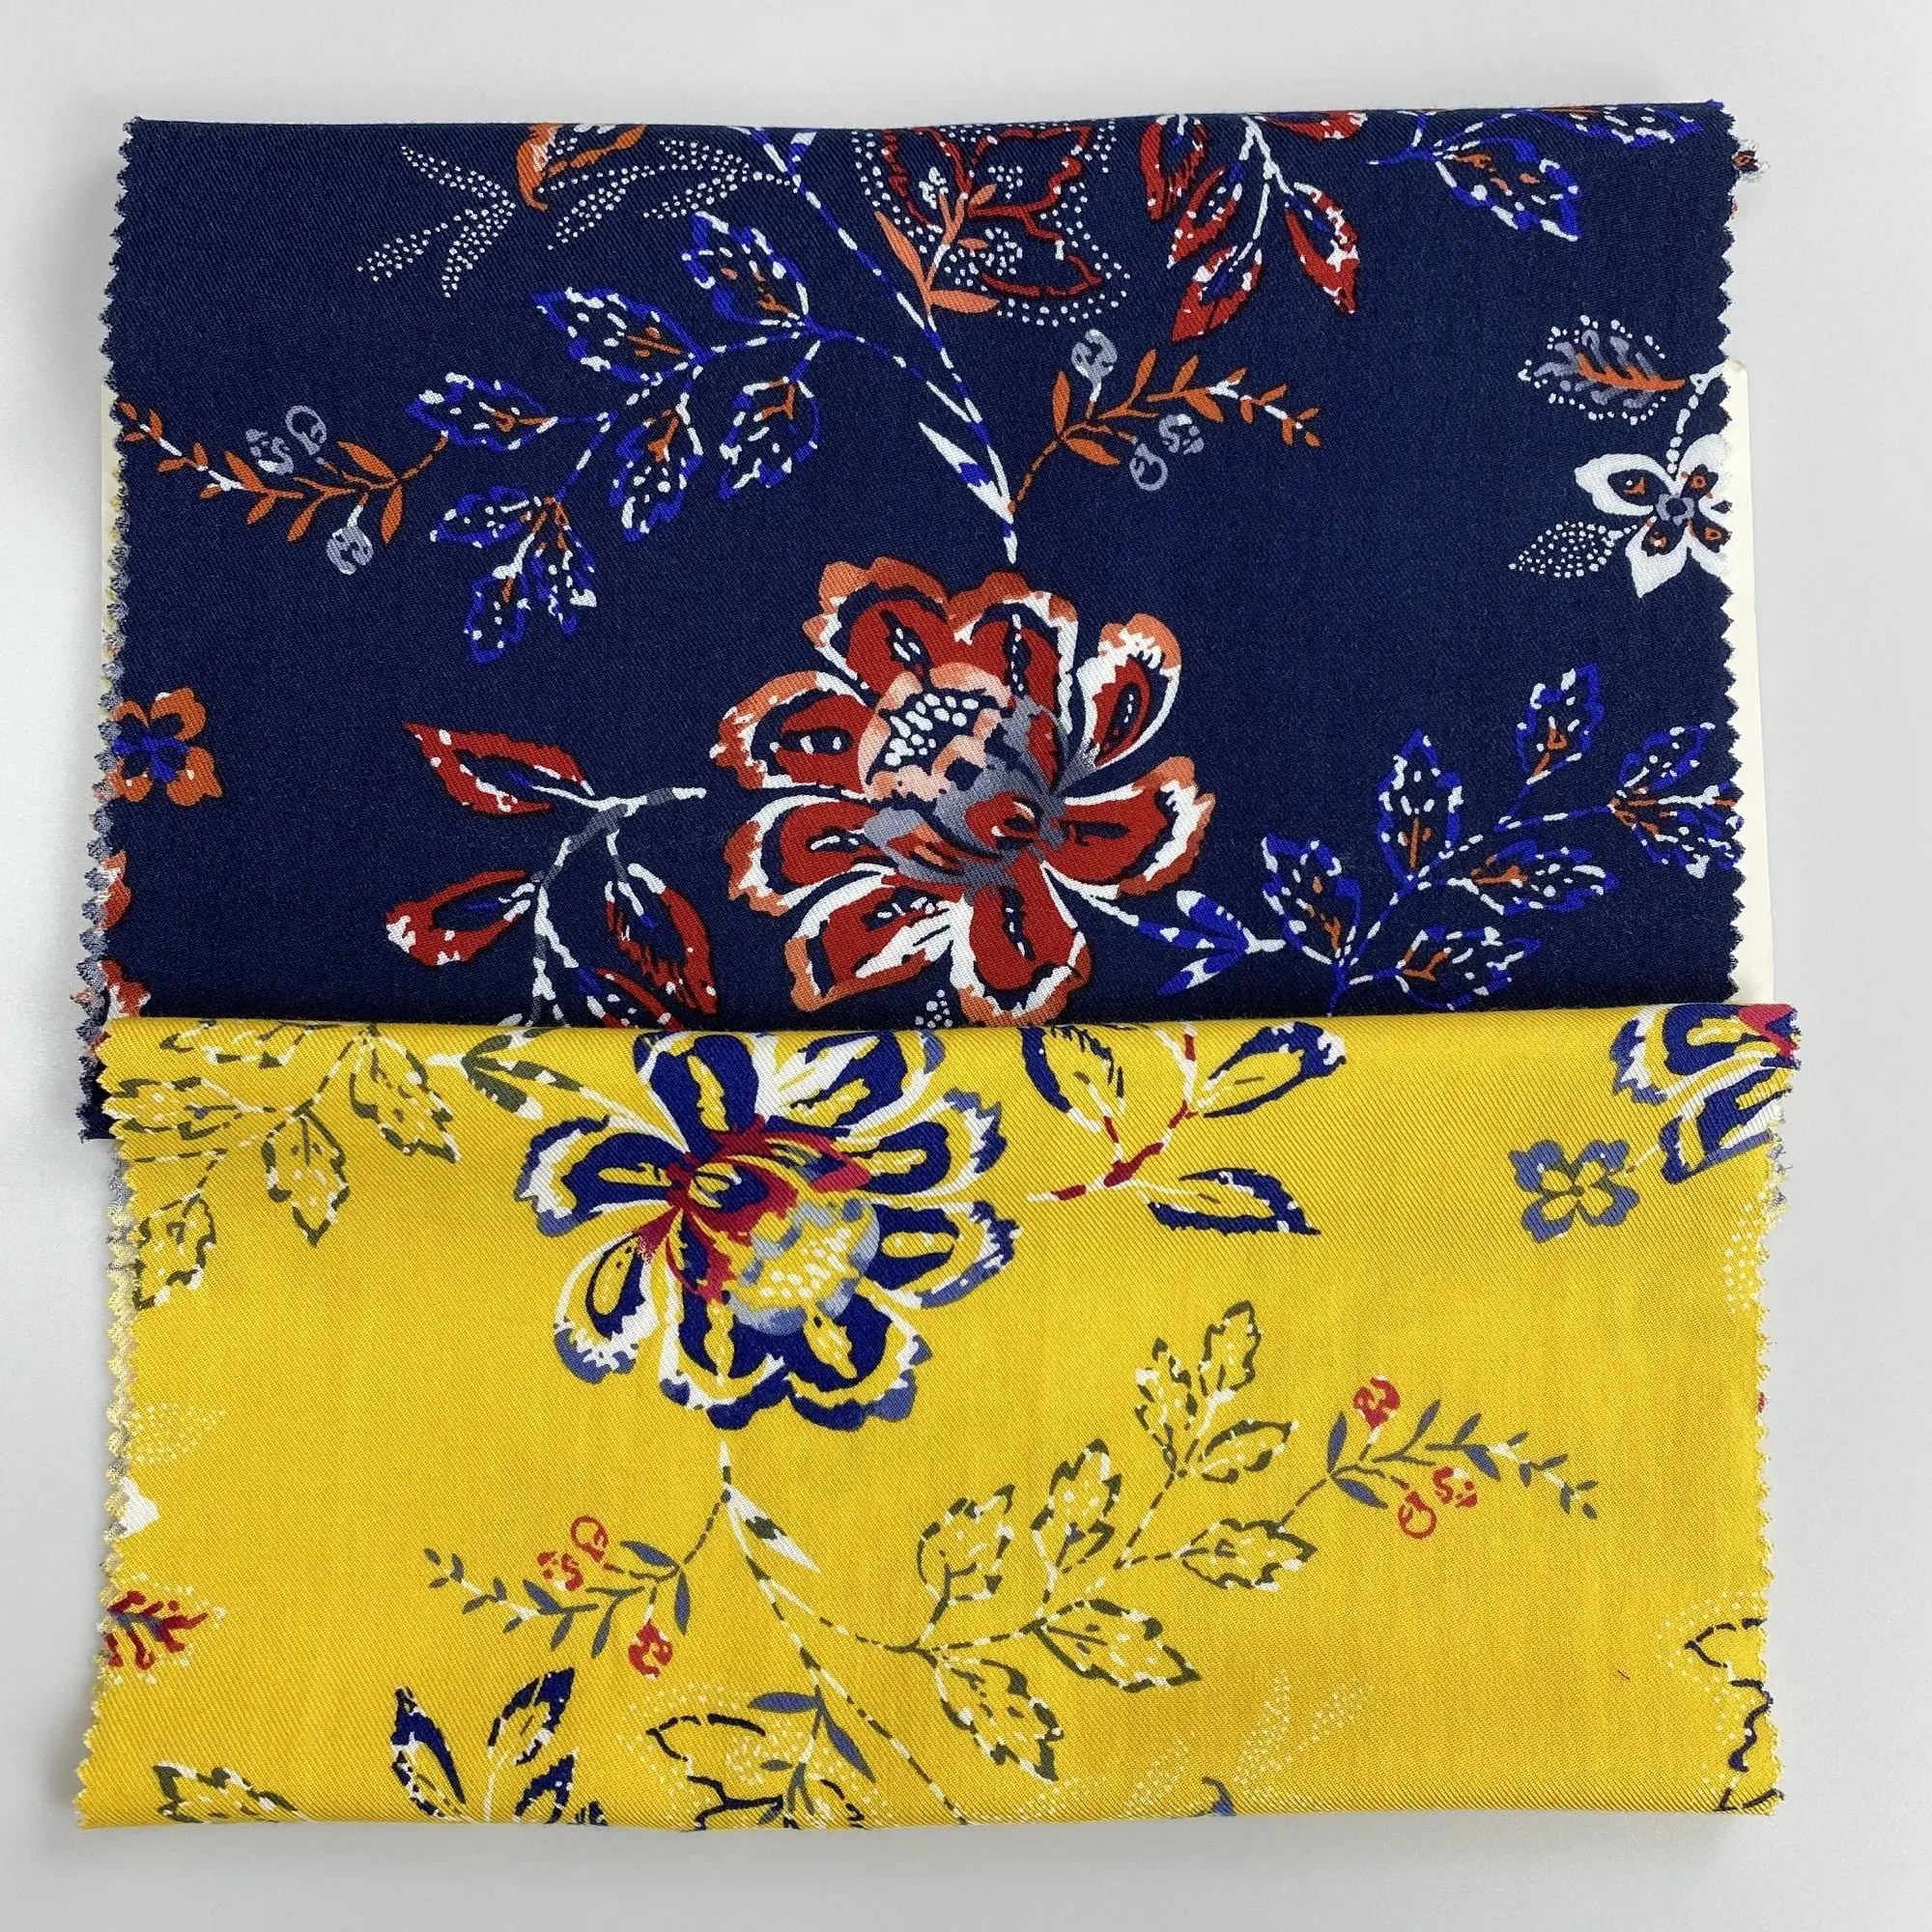 Direct sales example of challis kilo dress shirt material rayon printed fabric with flower